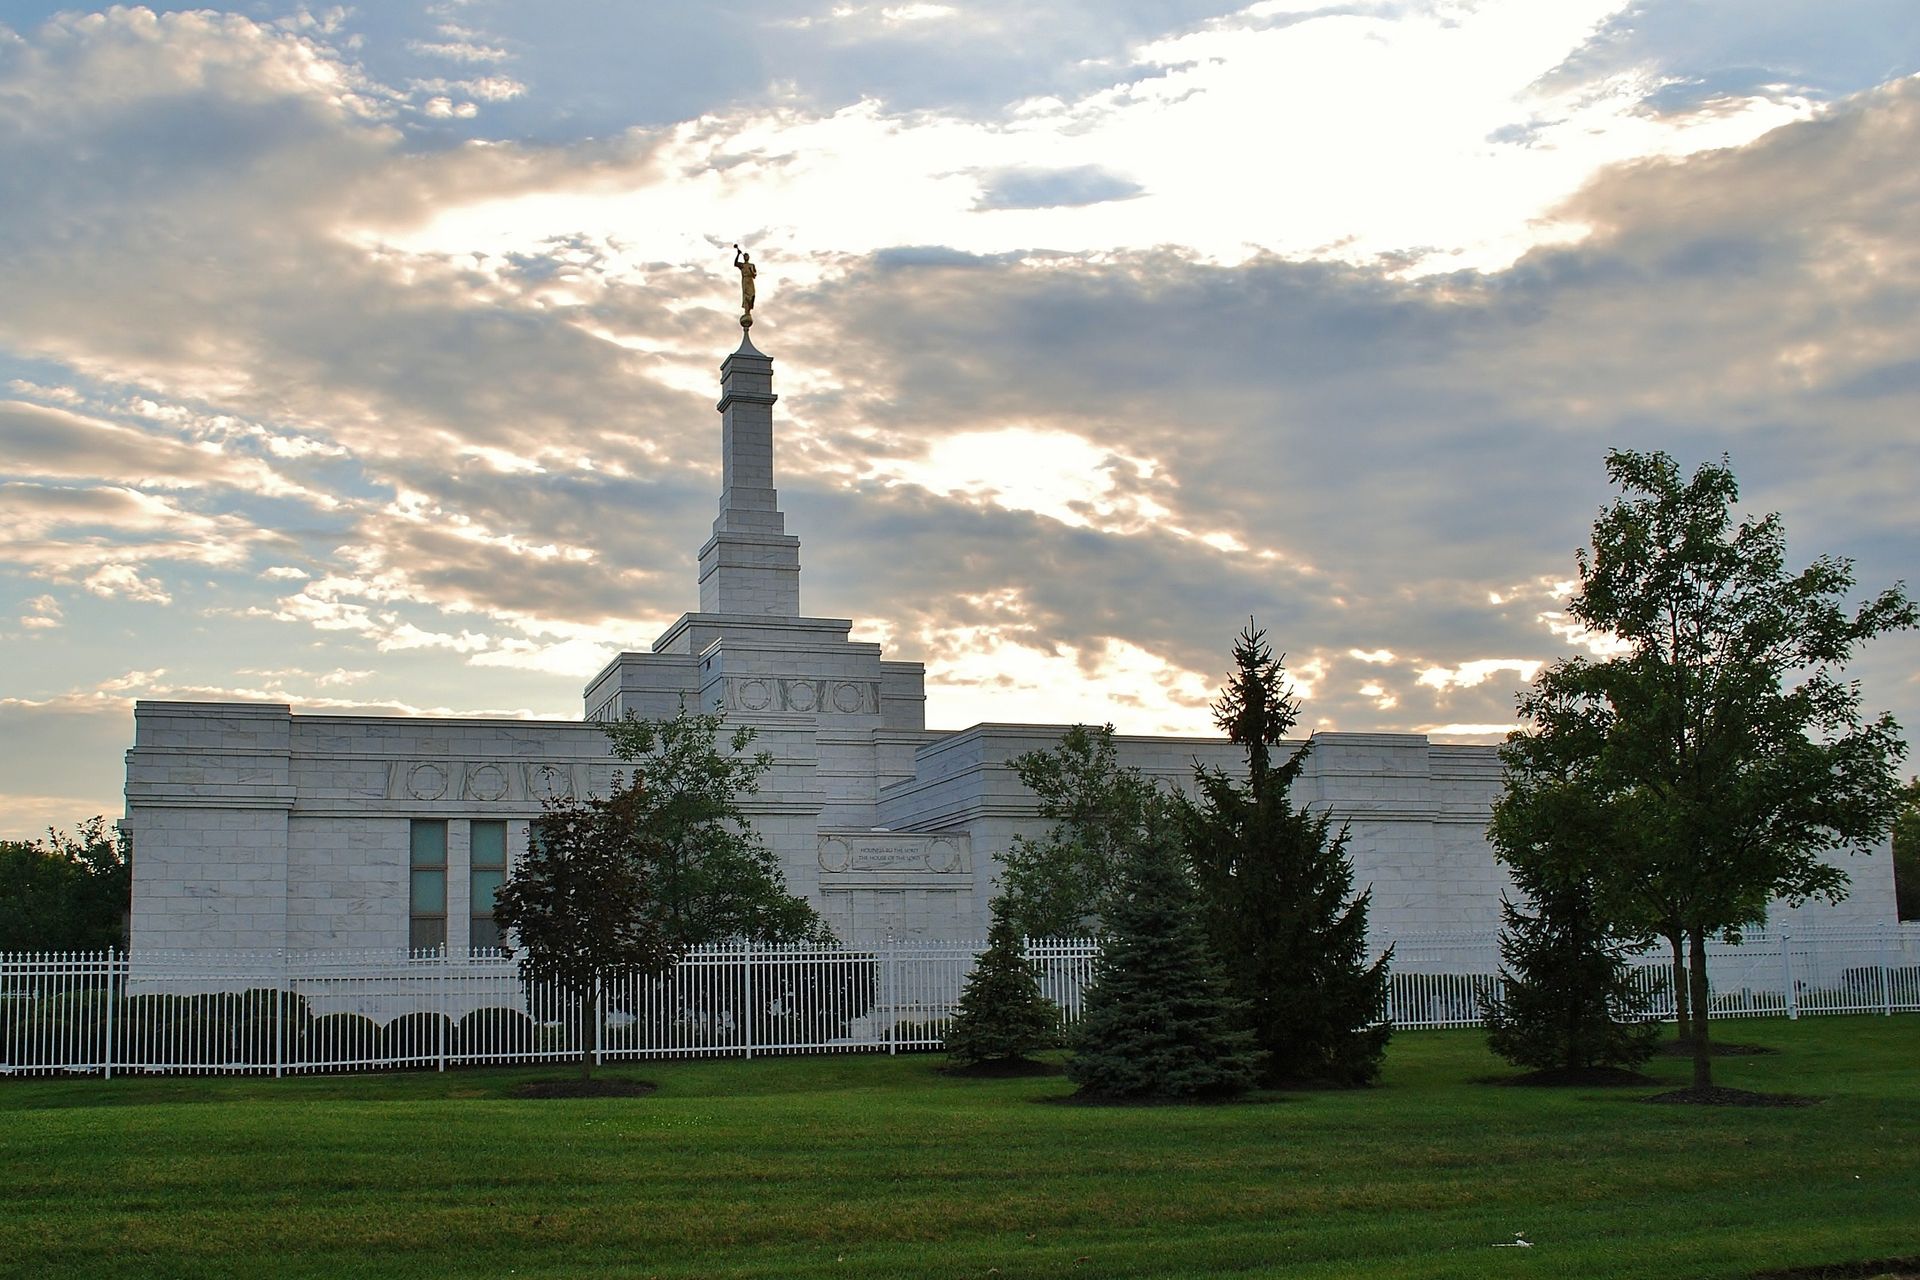 A view of the Columbus Ohio Temple from the grounds in the evening.